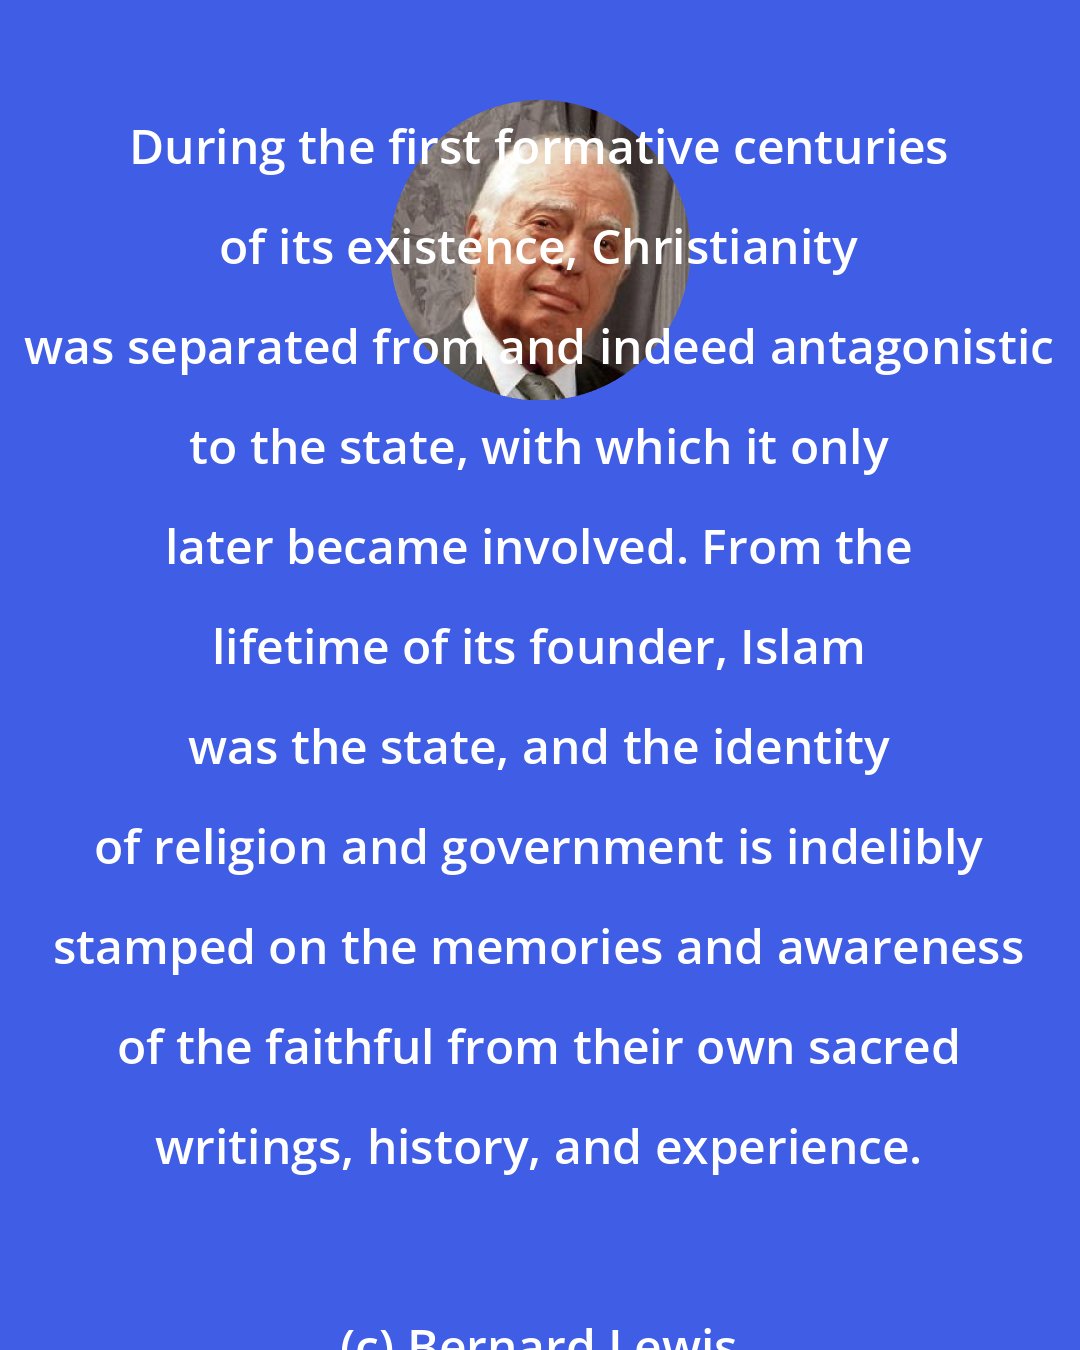 Bernard Lewis: During the first formative centuries of its existence, Christianity was separated from and indeed antagonistic to the state, with which it only later became involved. From the lifetime of its founder, Islam was the state, and the identity of religion and government is indelibly stamped on the memories and awareness of the faithful from their own sacred writings, history, and experience.